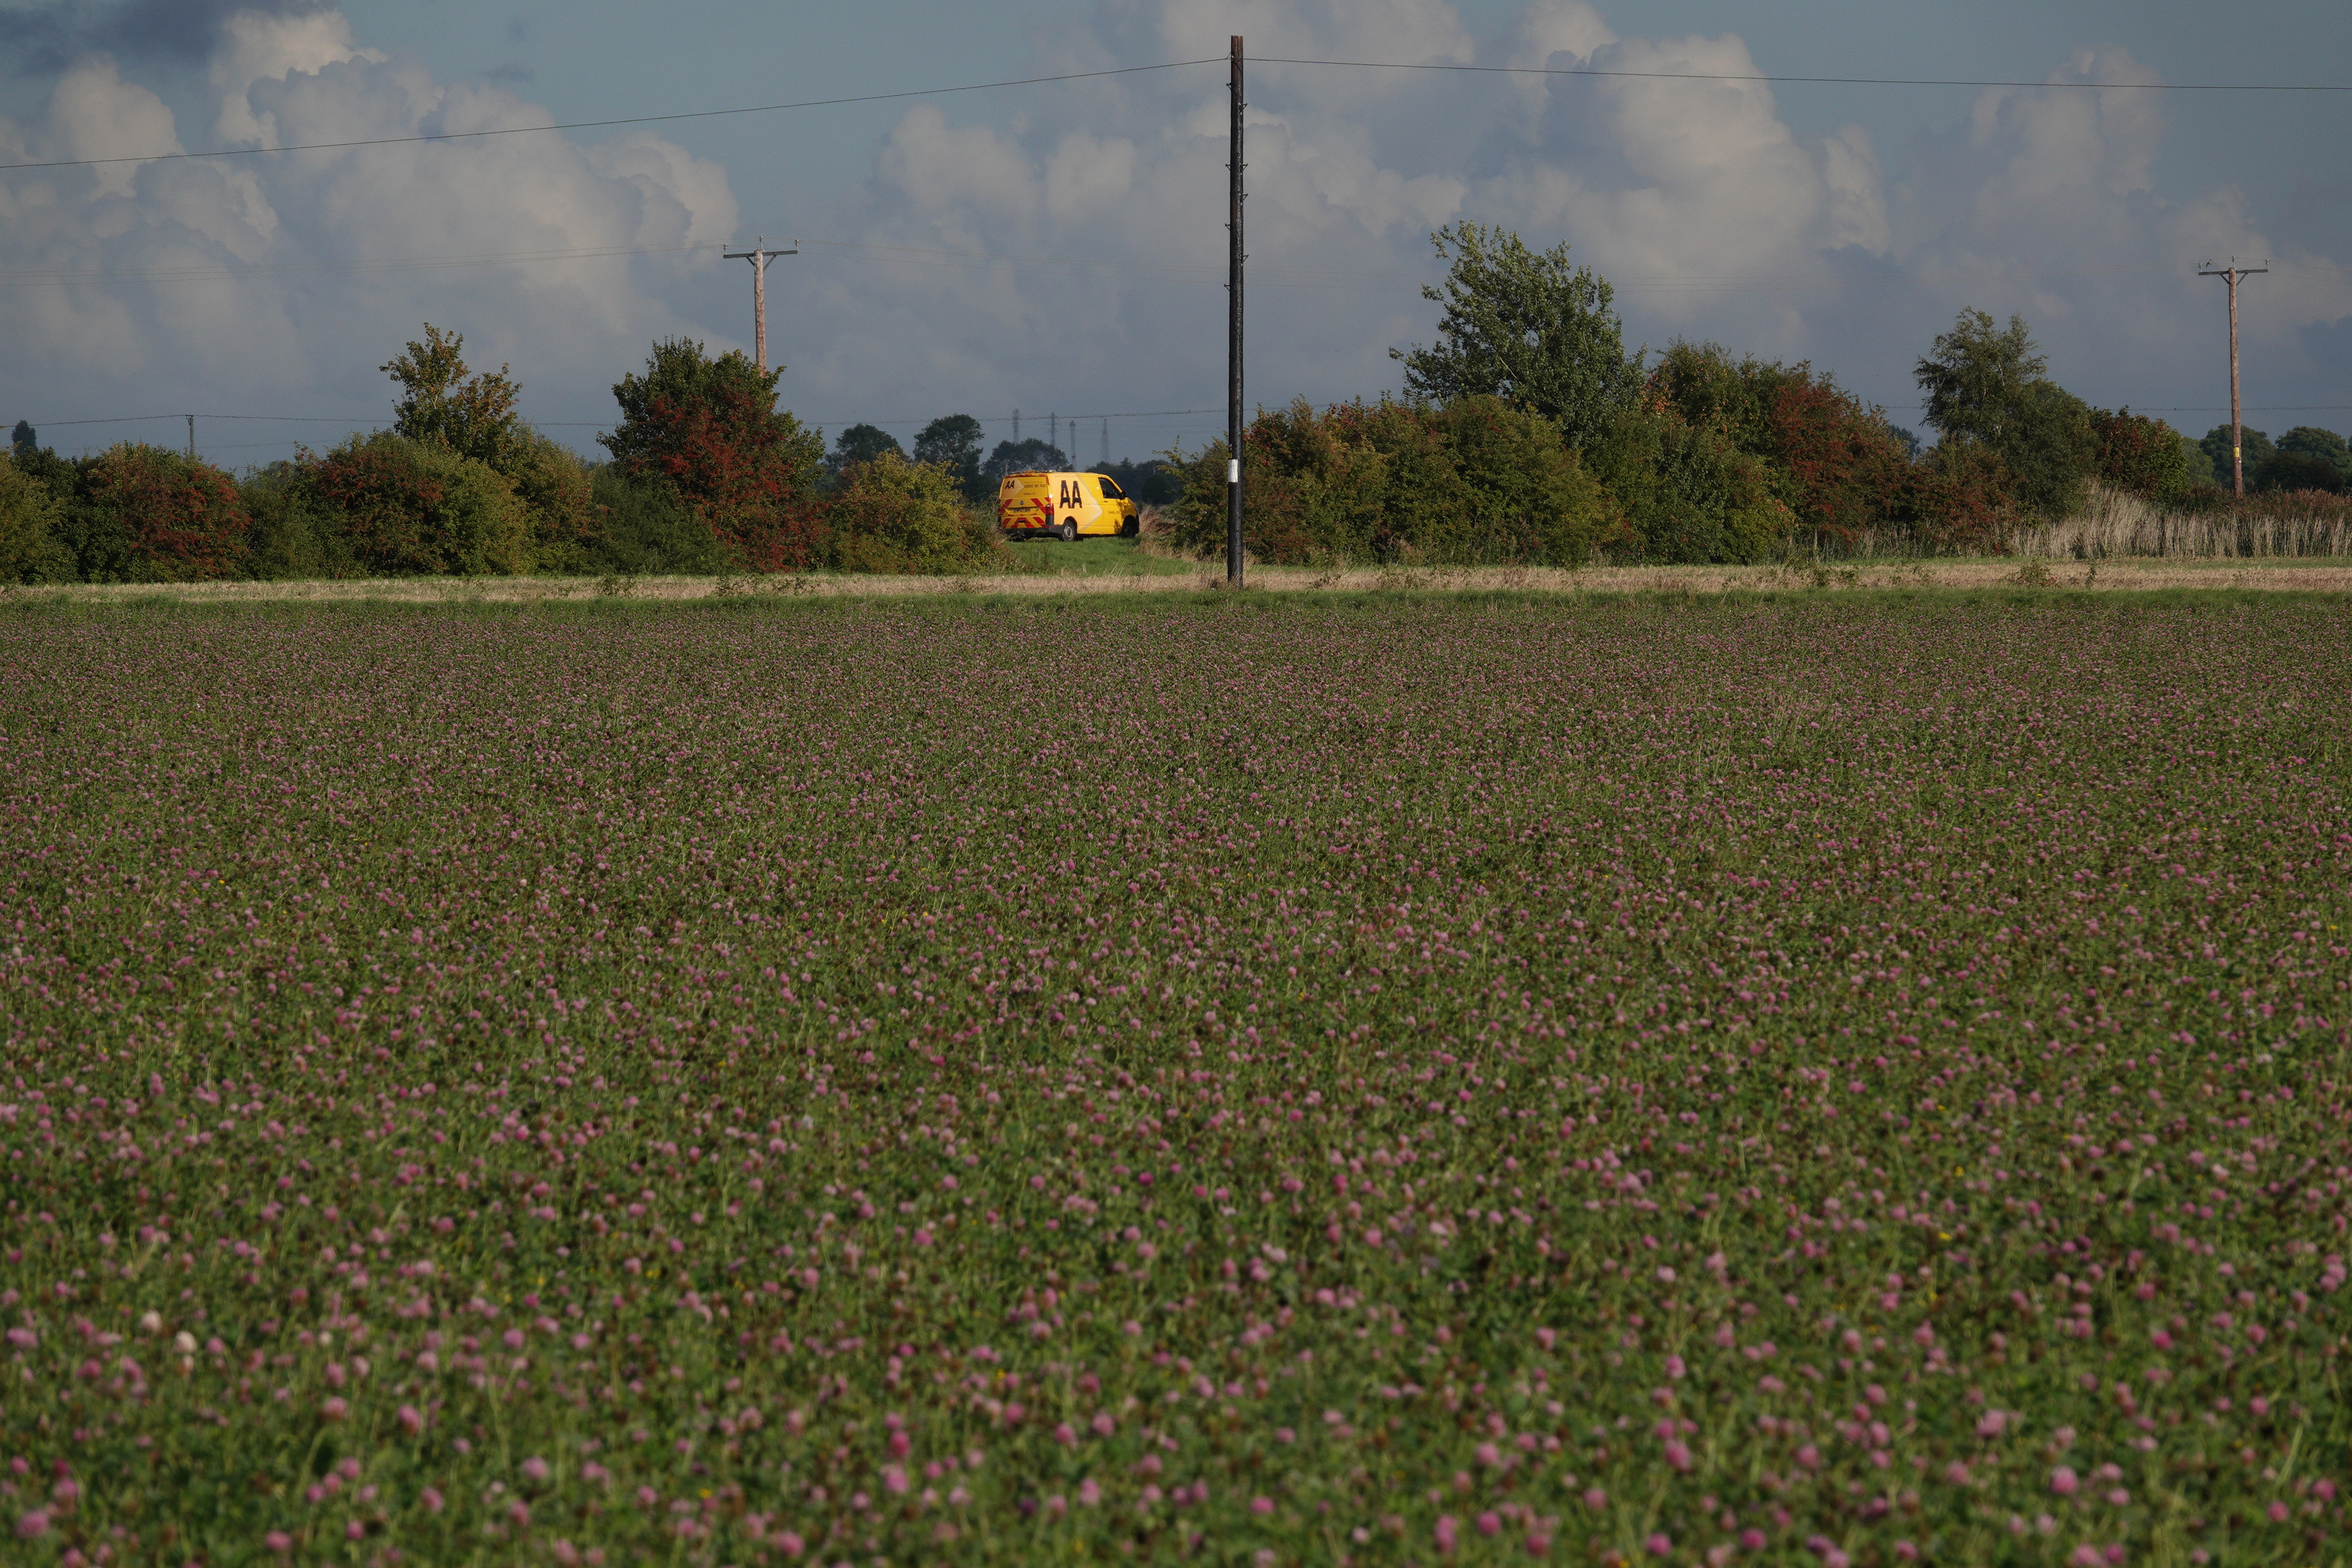 The Clouded Yellows are like miniature AA vans speeding across the field.... see what I did there!